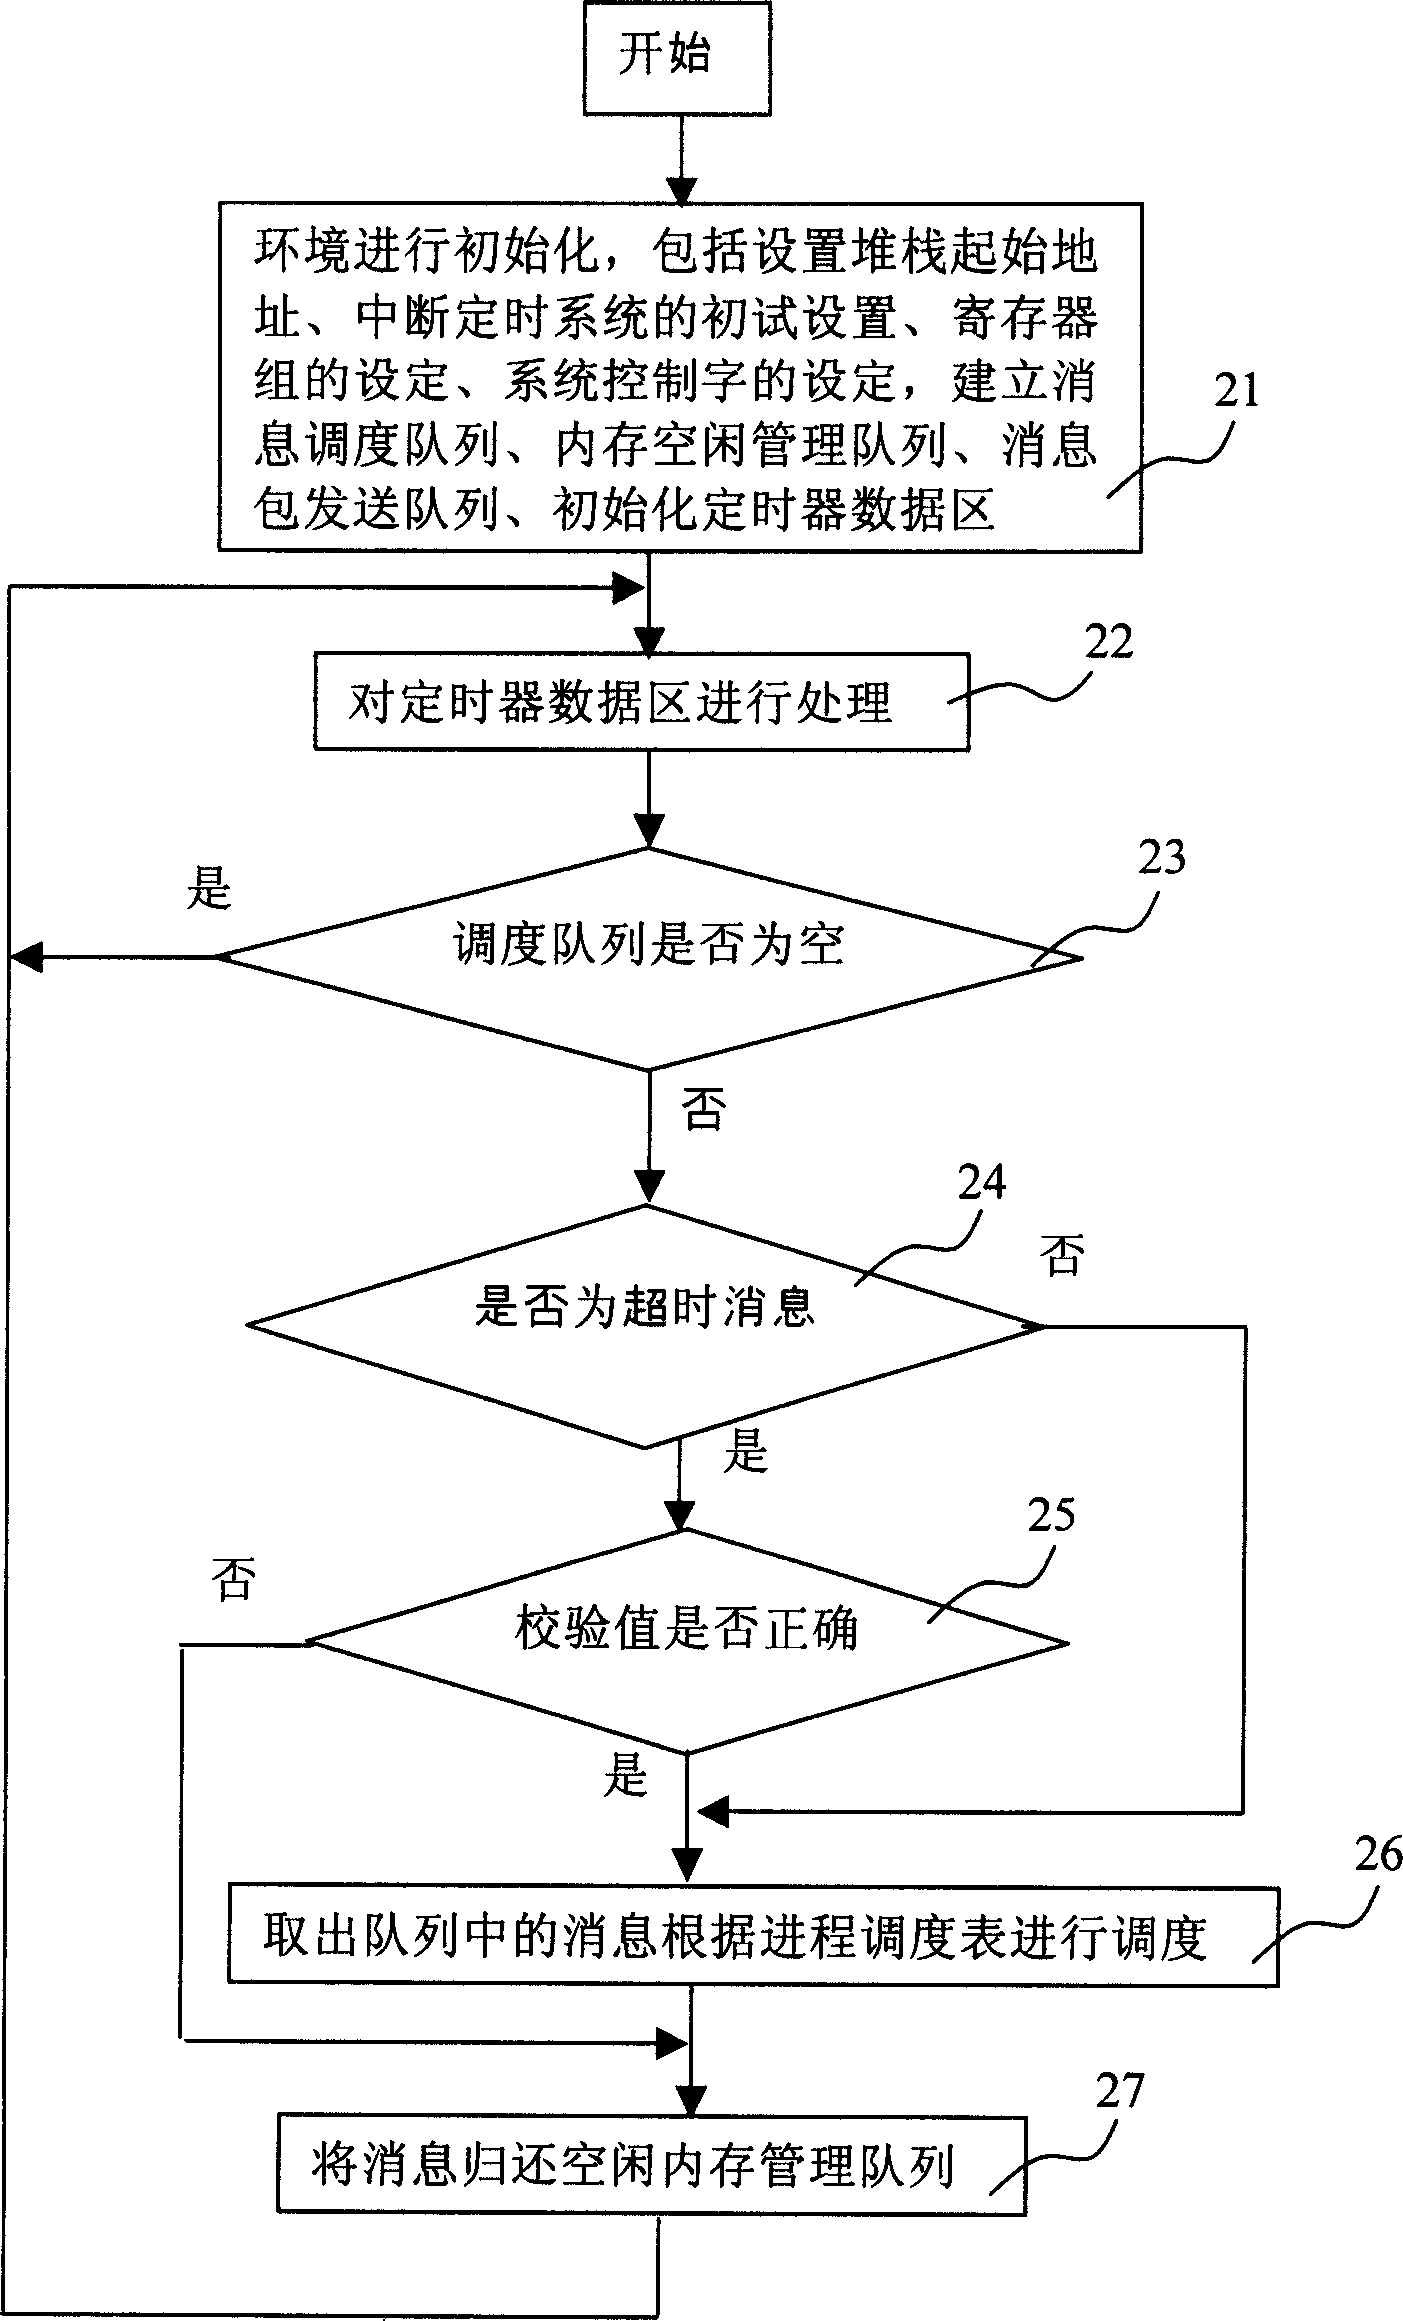 Modular implement method for operating system of single-chip microcomputer